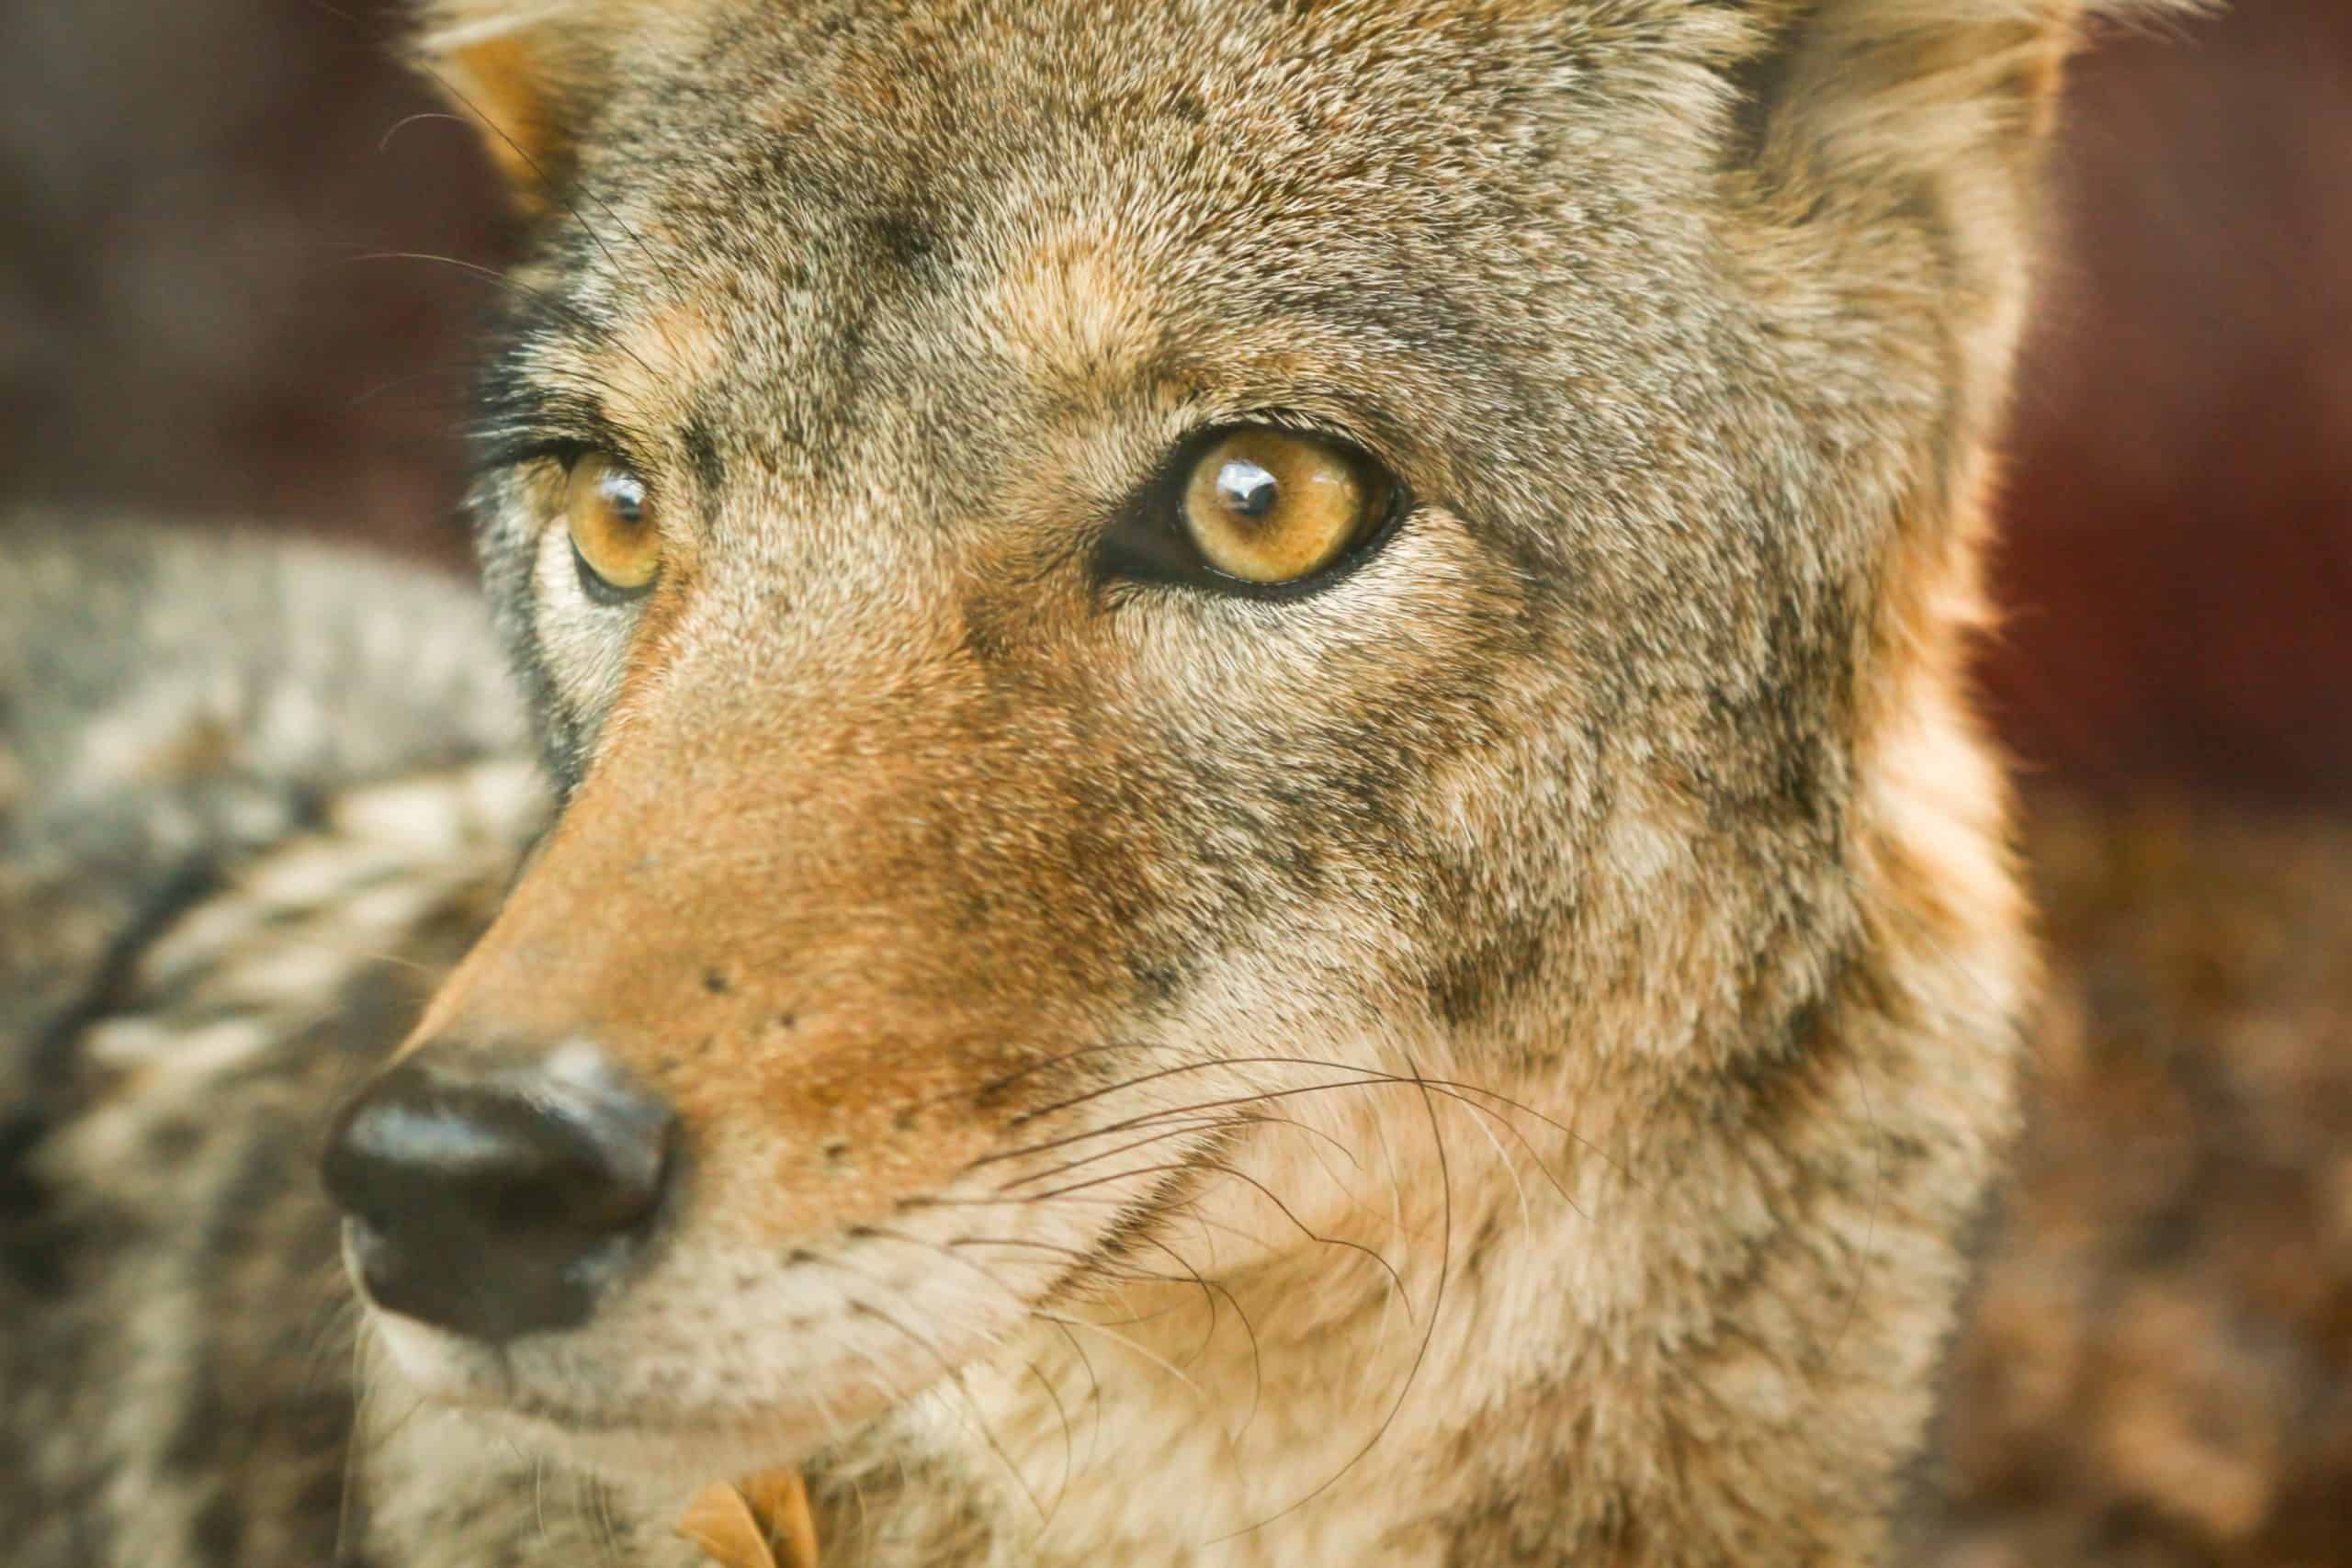 Coyotes in Pennsylvania: Are they coming to get you? 